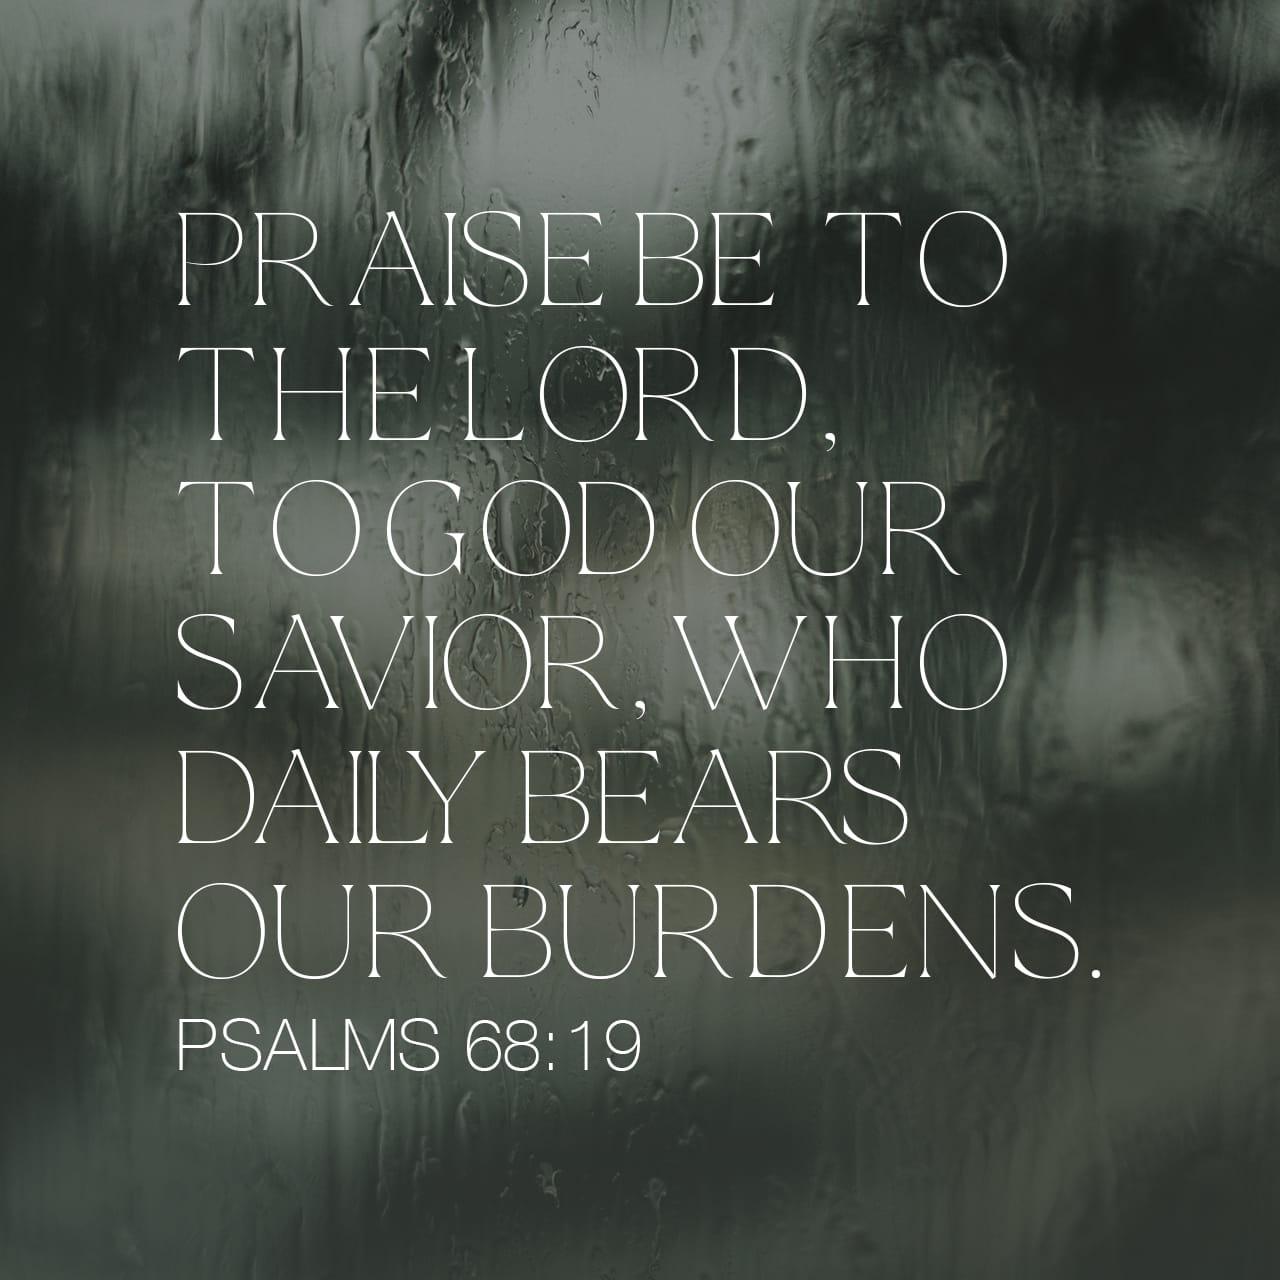 Bible Verse of the Day - day 84 - image 49567 (Psalms 68:7-20)